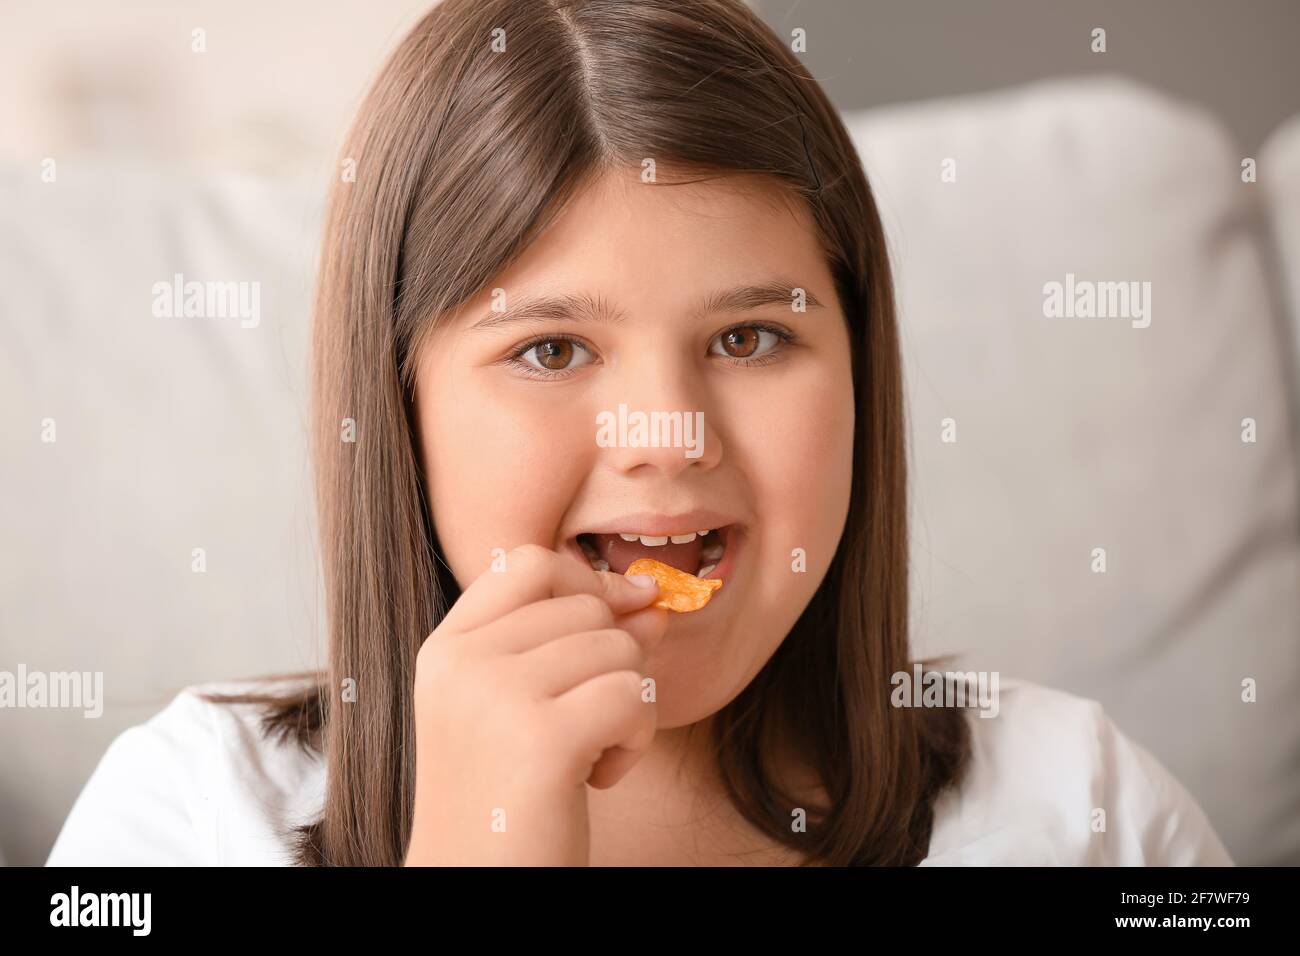 Overweight girl eating unhealthy chips at home Stock Photo